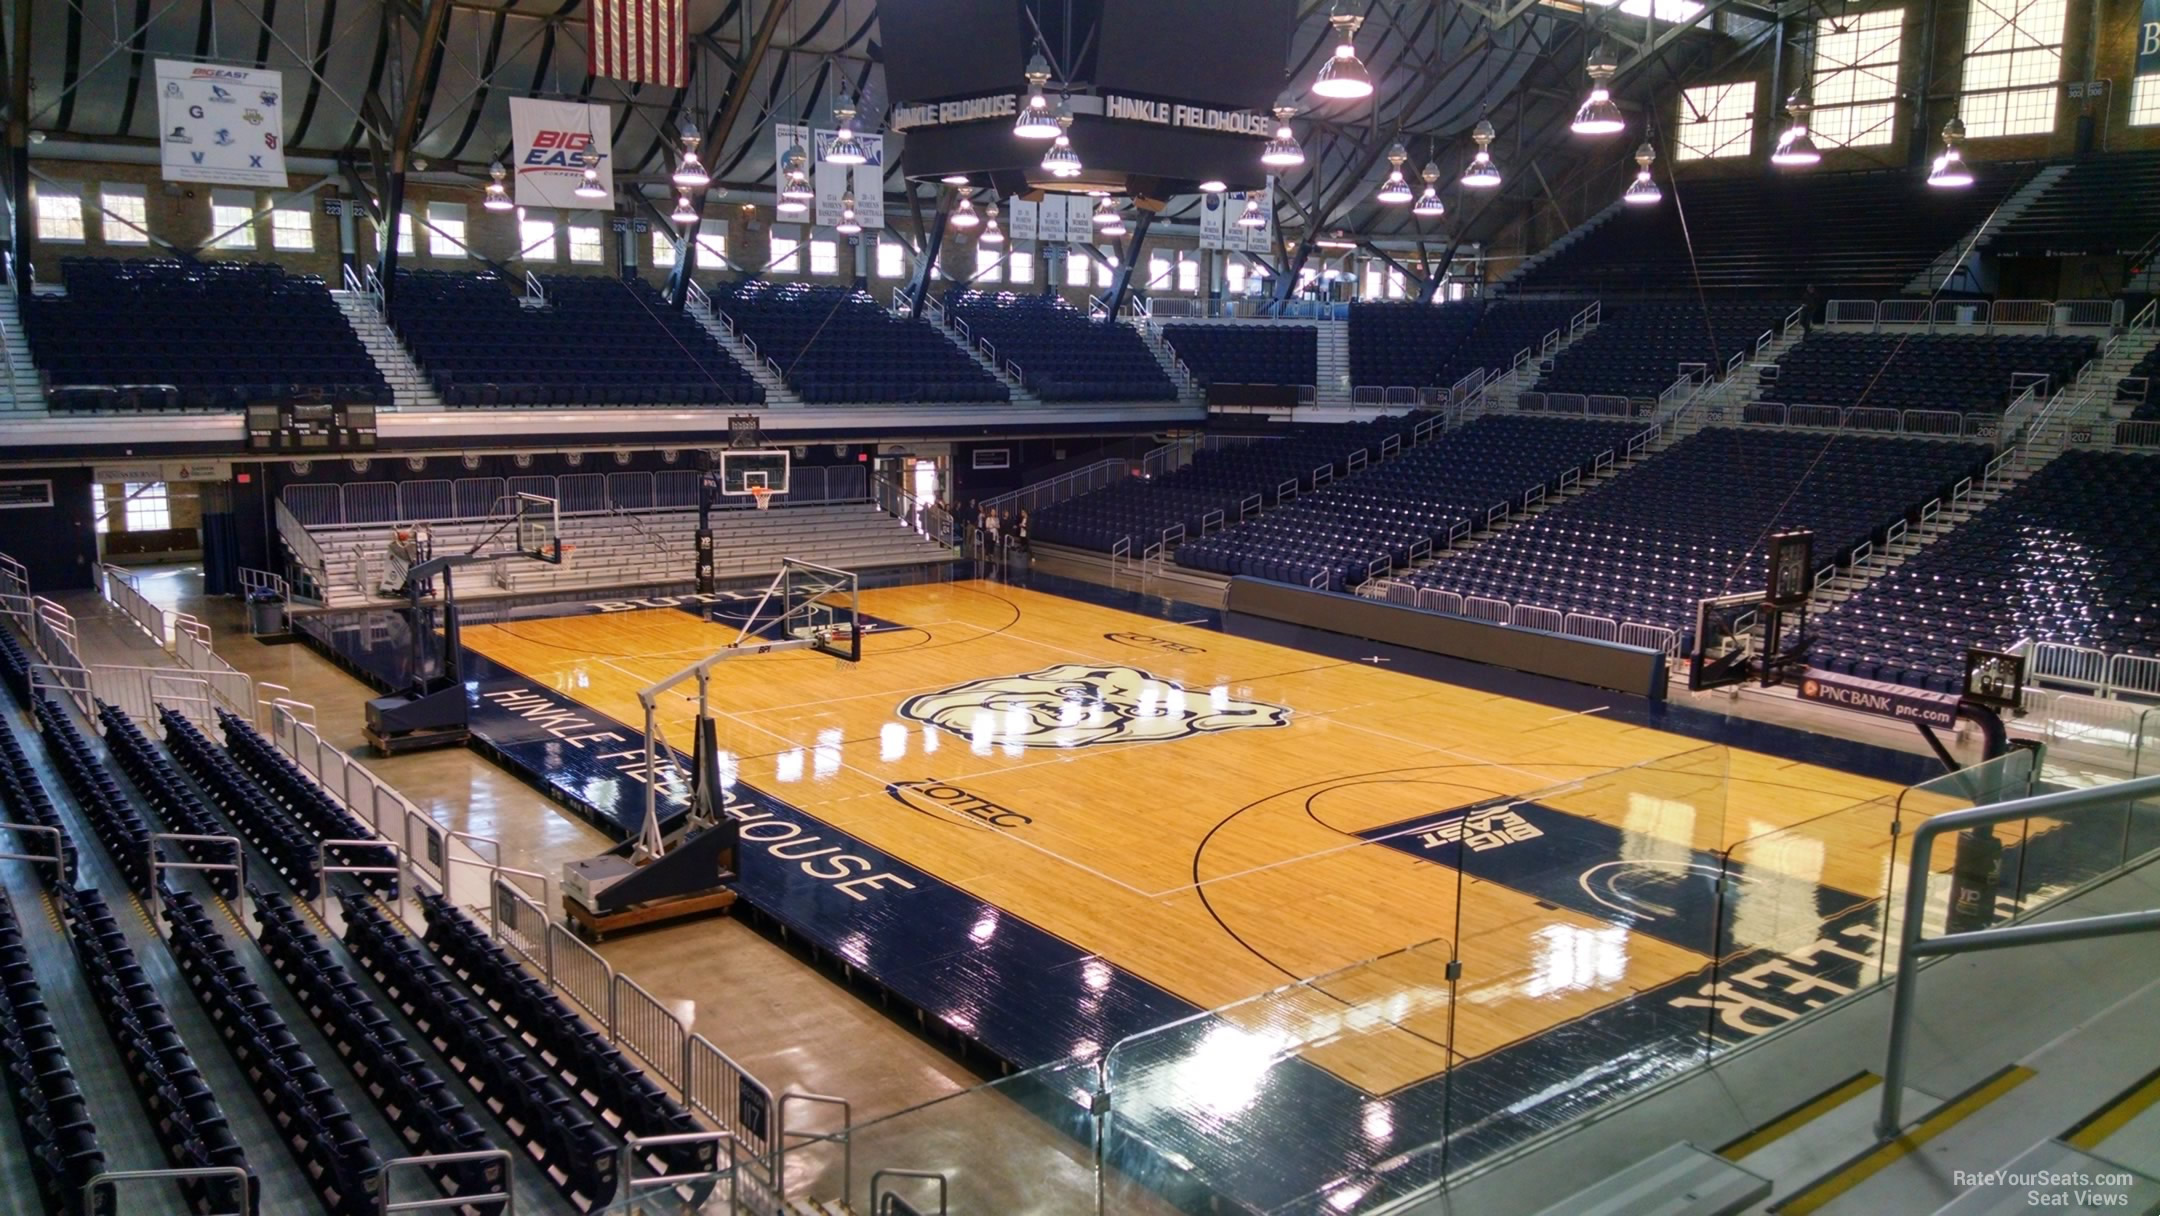 section 214, row 4 seat view  - hinkle fieldhouse